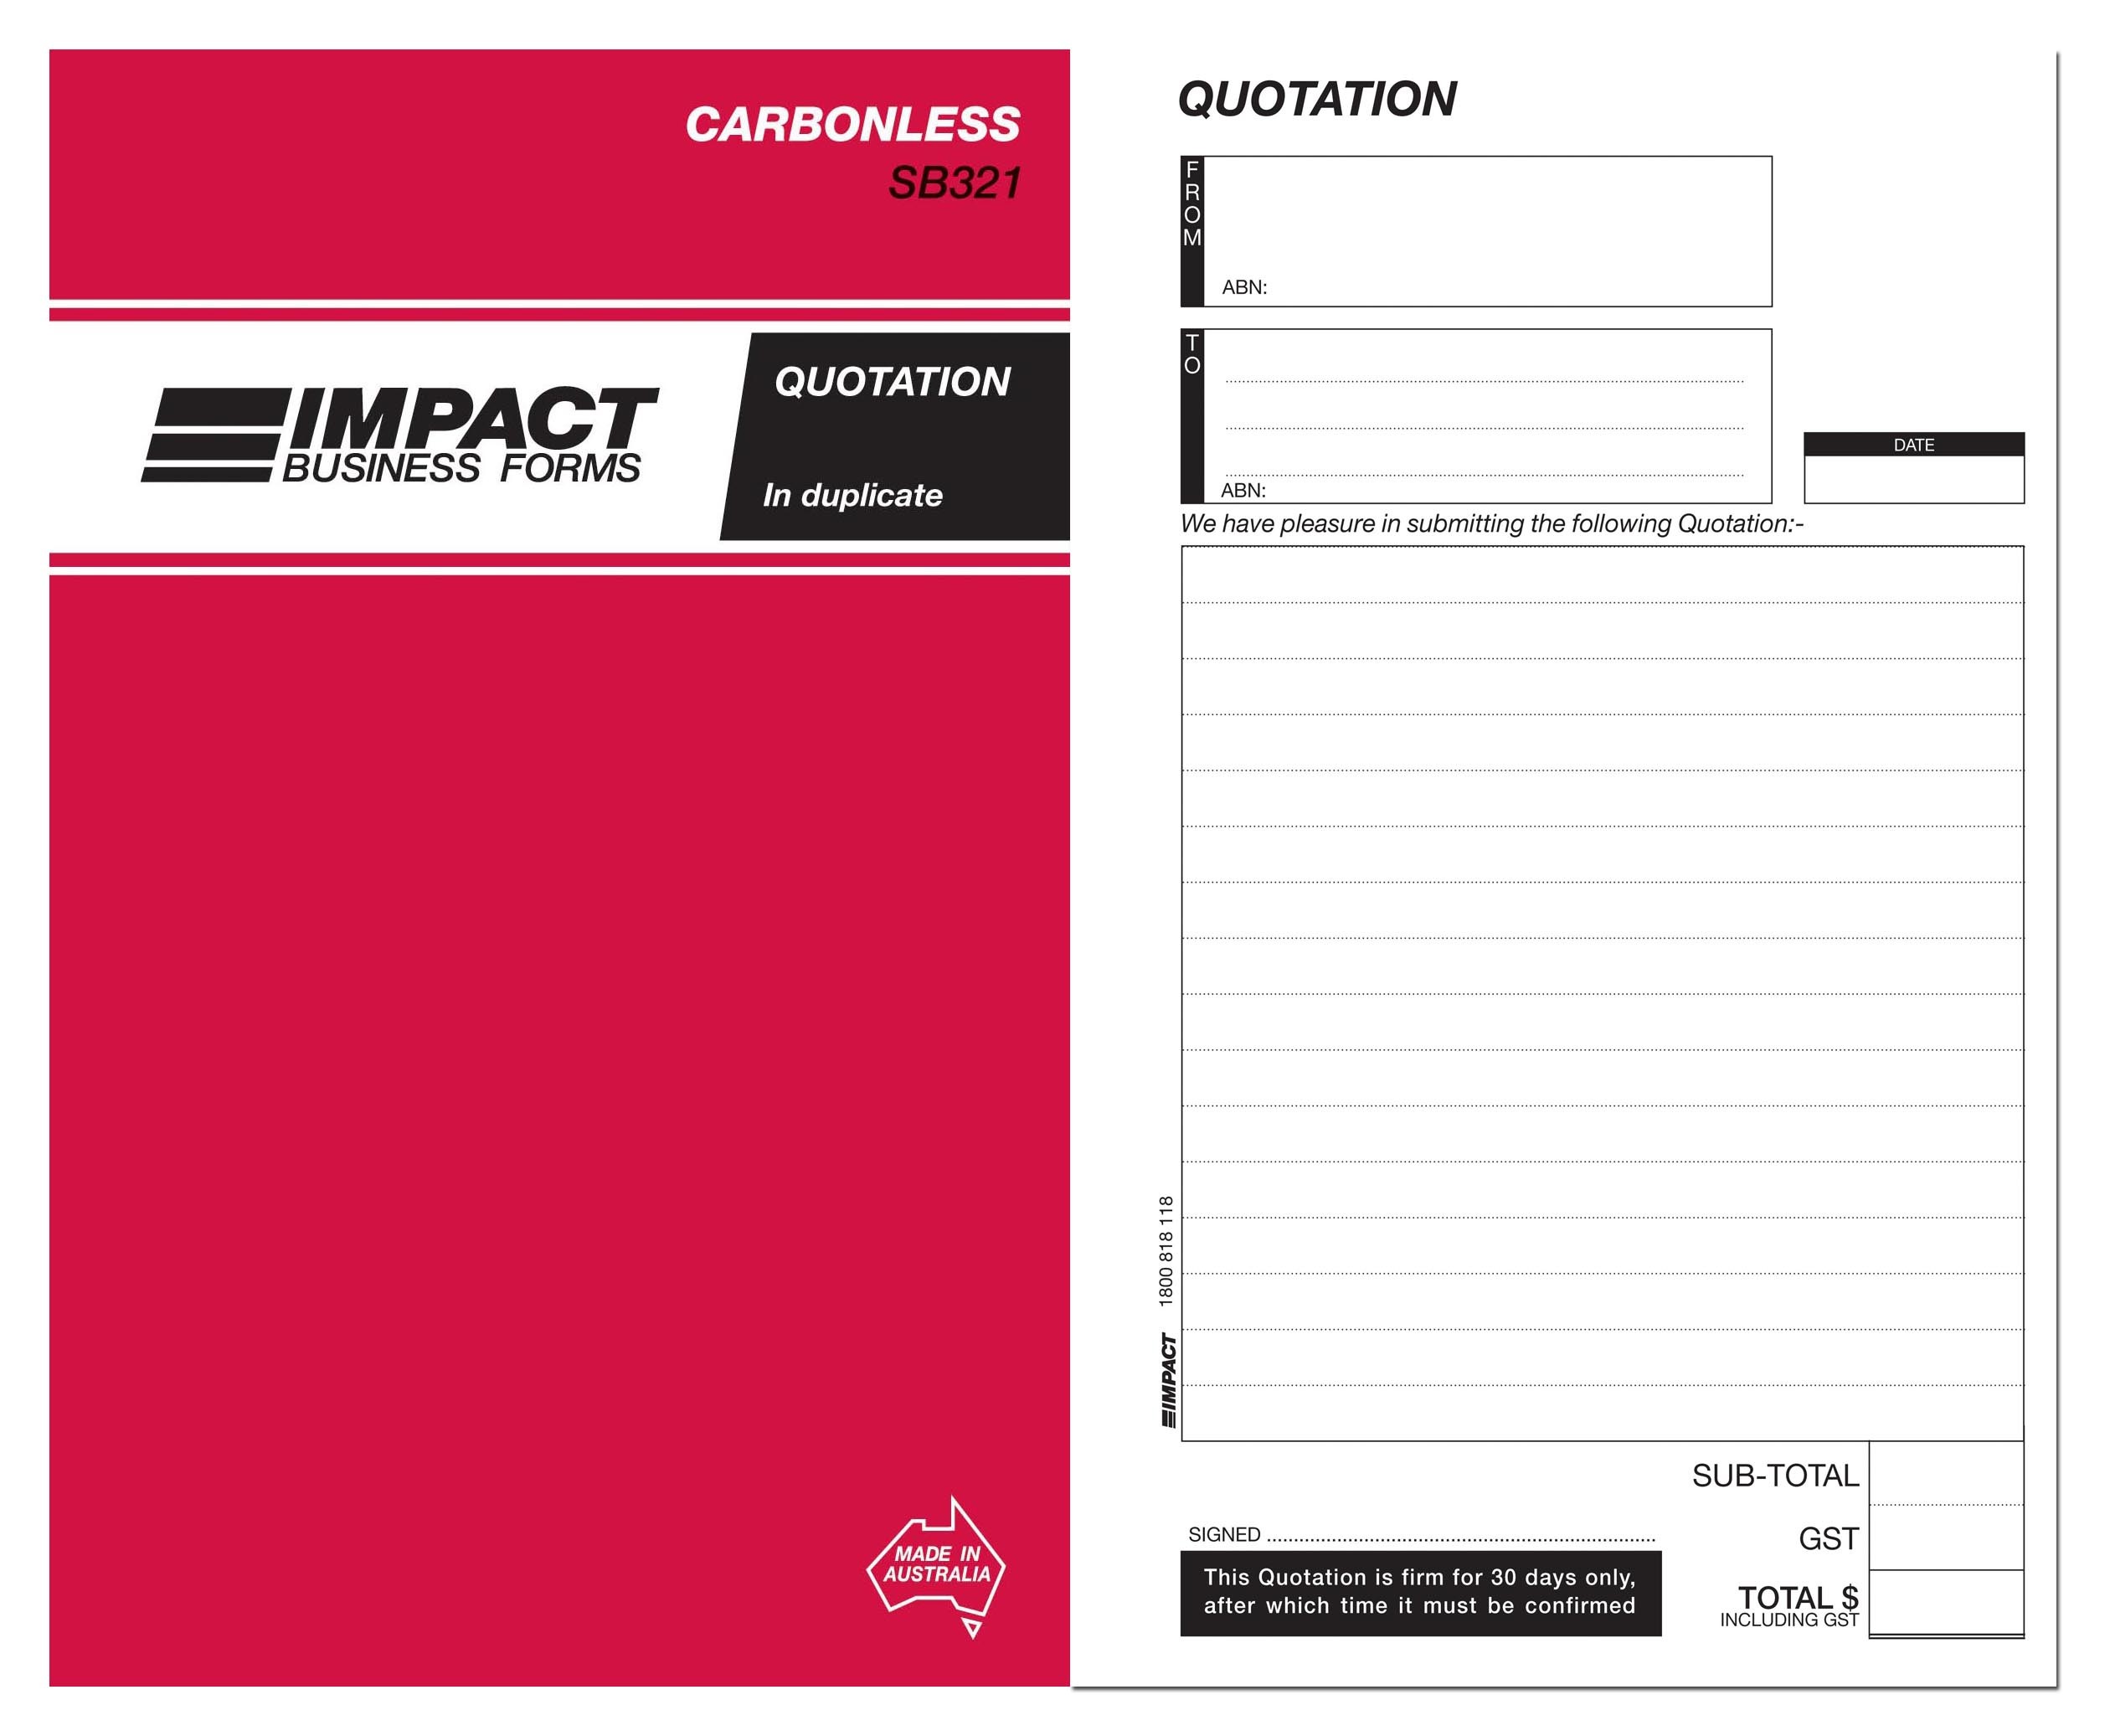 IMPACT CARBONLESS QUOTATION BOOK DUP. (8x5) SB-321 (price excludes gst)